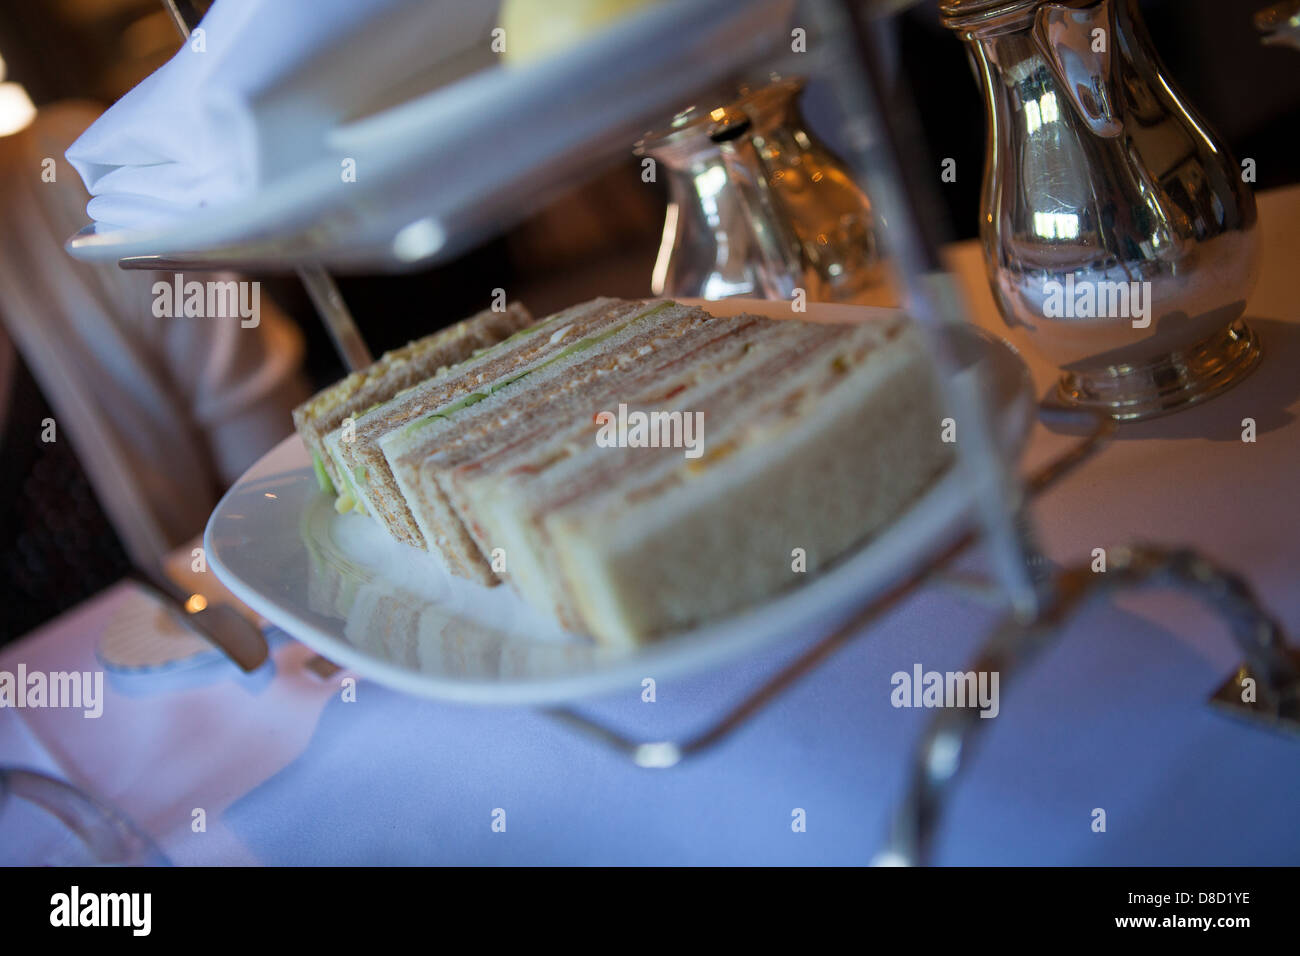 Afternoon Tea English delicacy sandwich selection in hotel, England, Britain Stock Photo